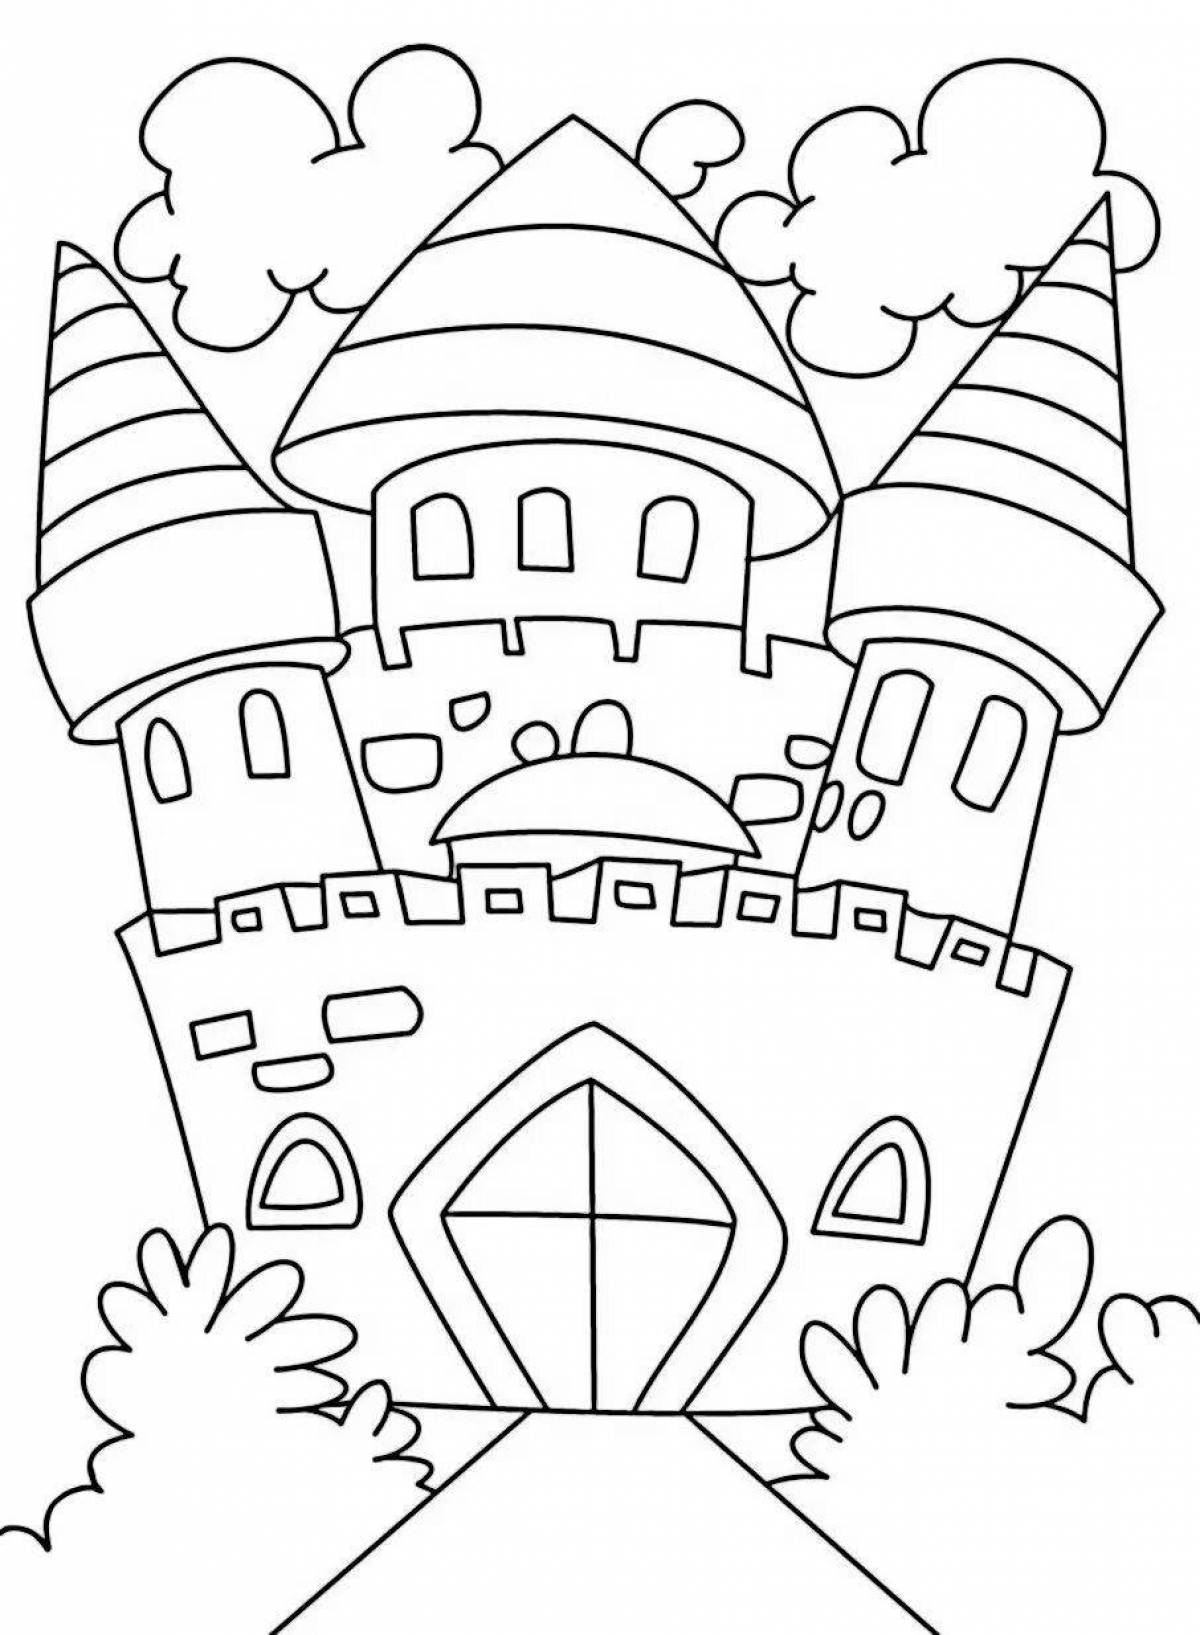 Playful castle coloring page for girls